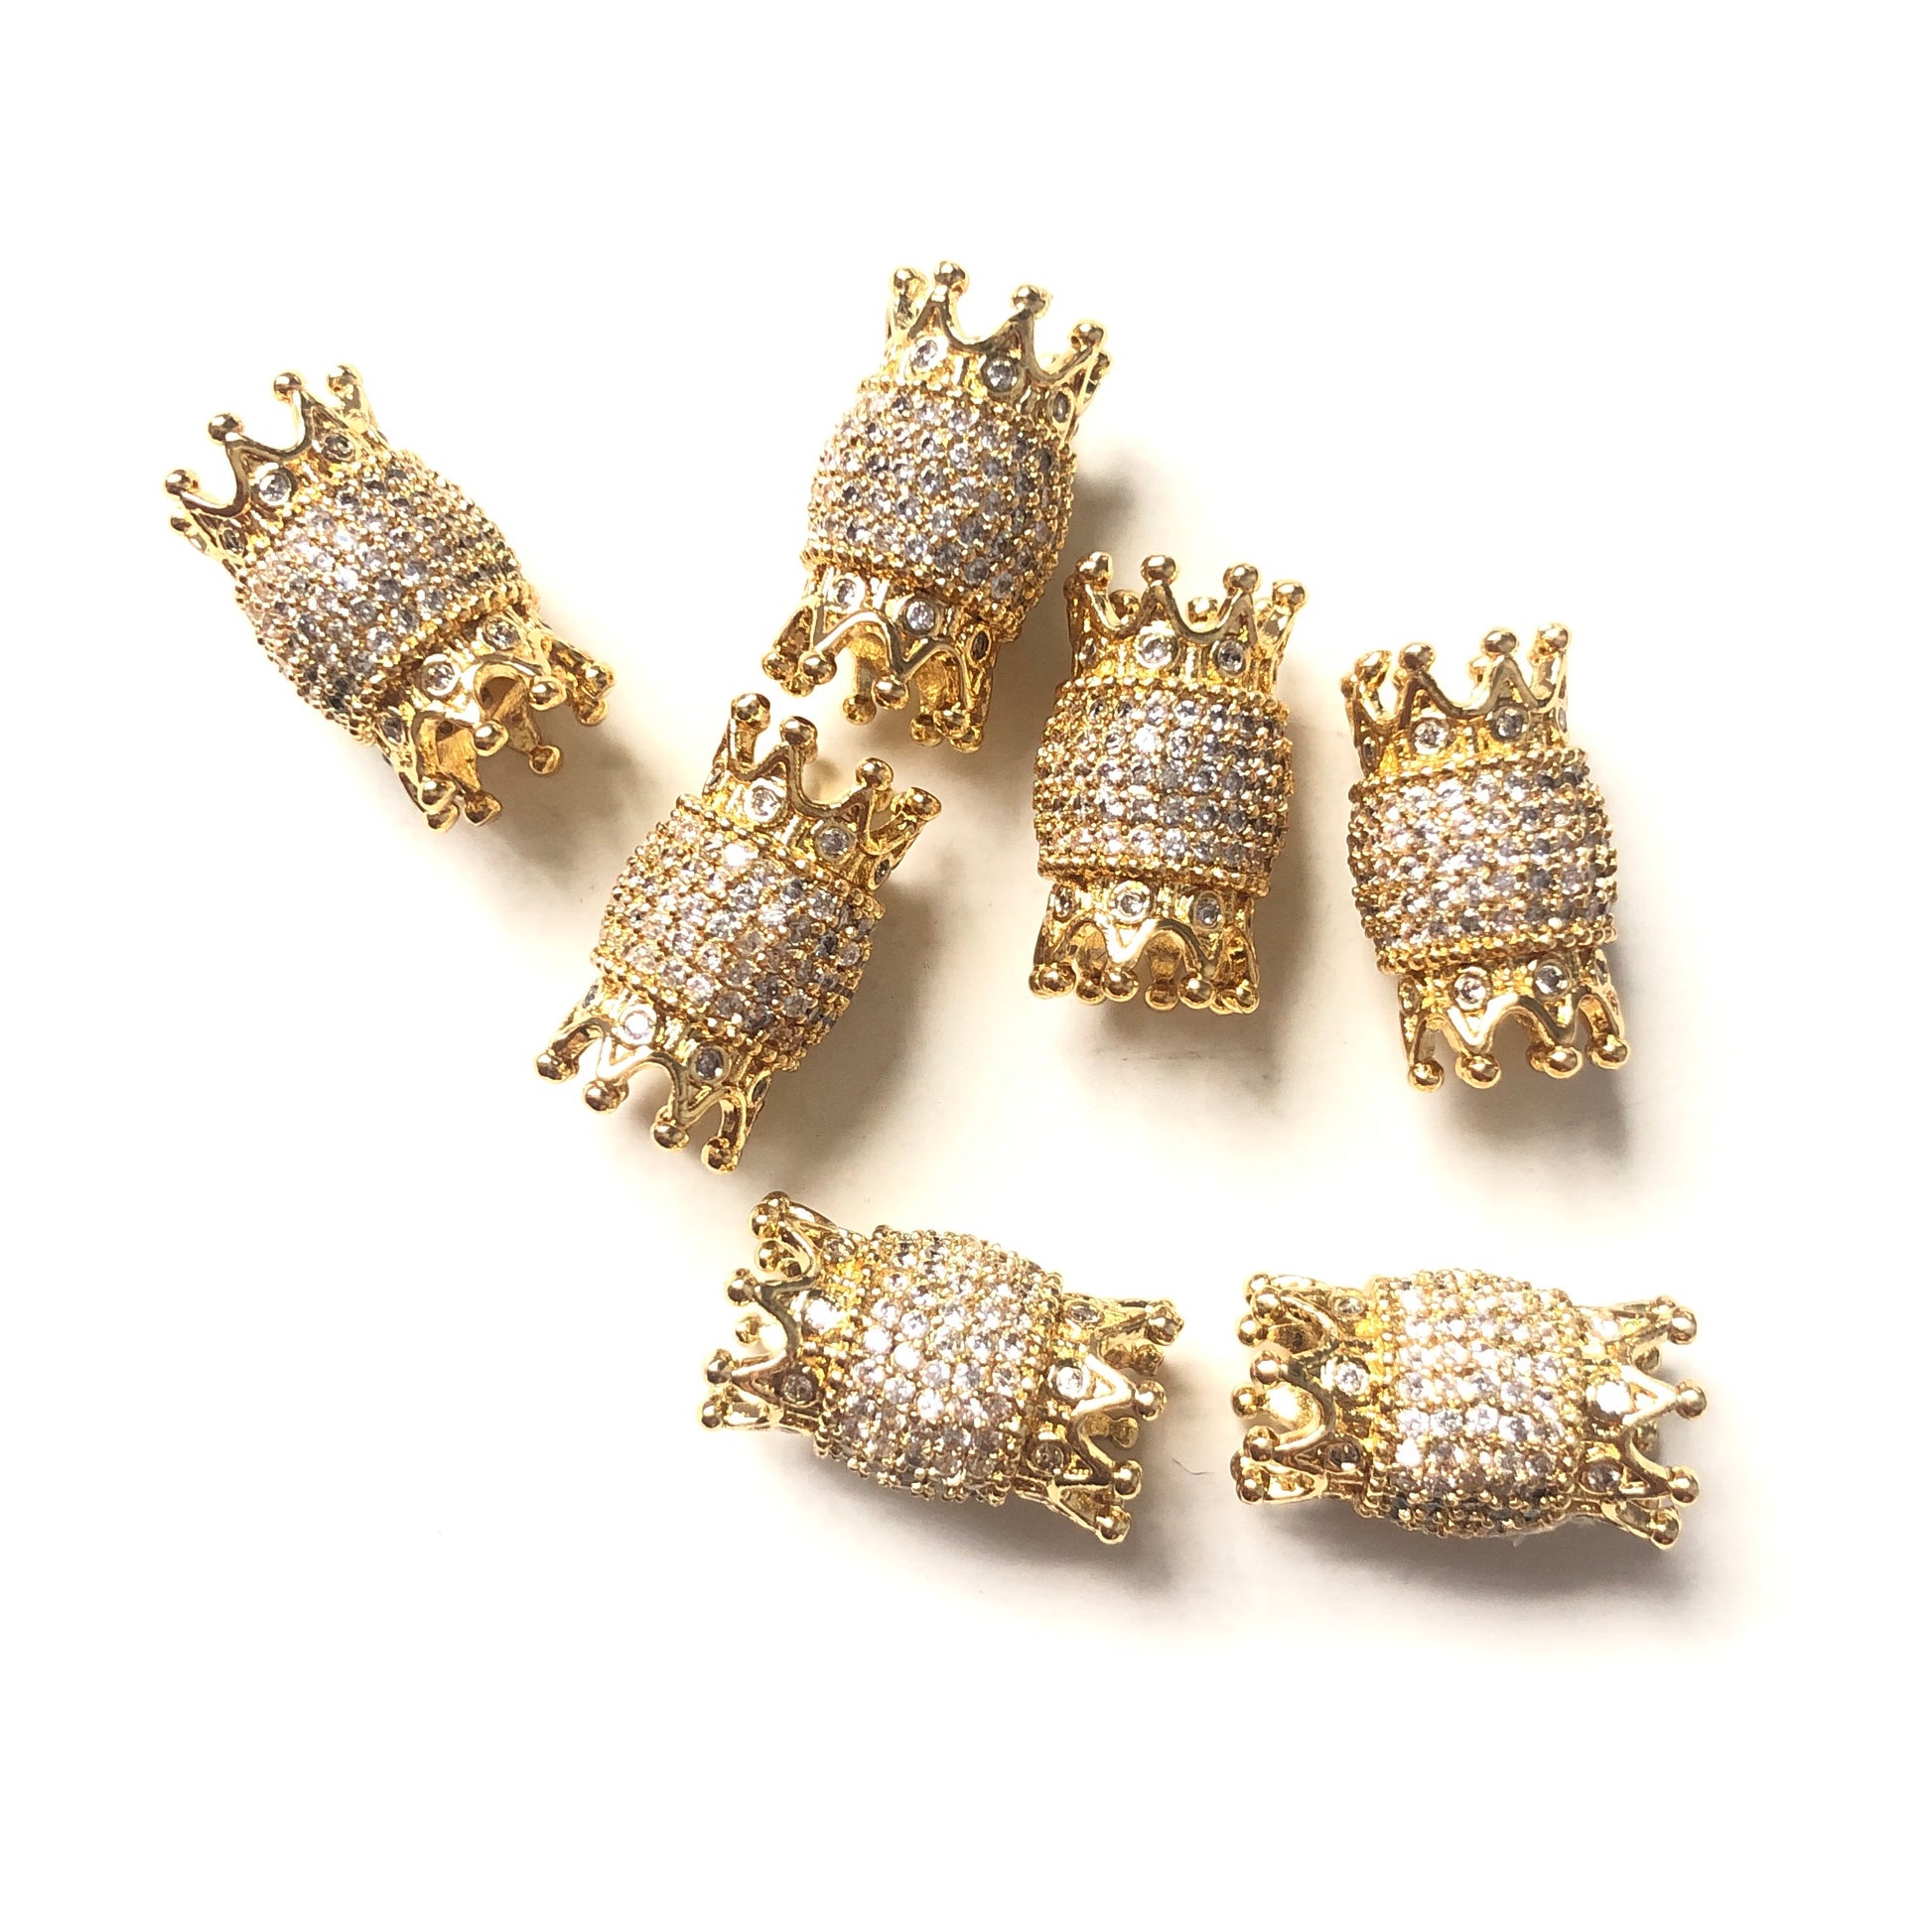 10pcs/lot 16*9mm CZ Paved Double Crown Spacers Gold CZ Paved Spacers Crown Beads Charms Beads Beyond